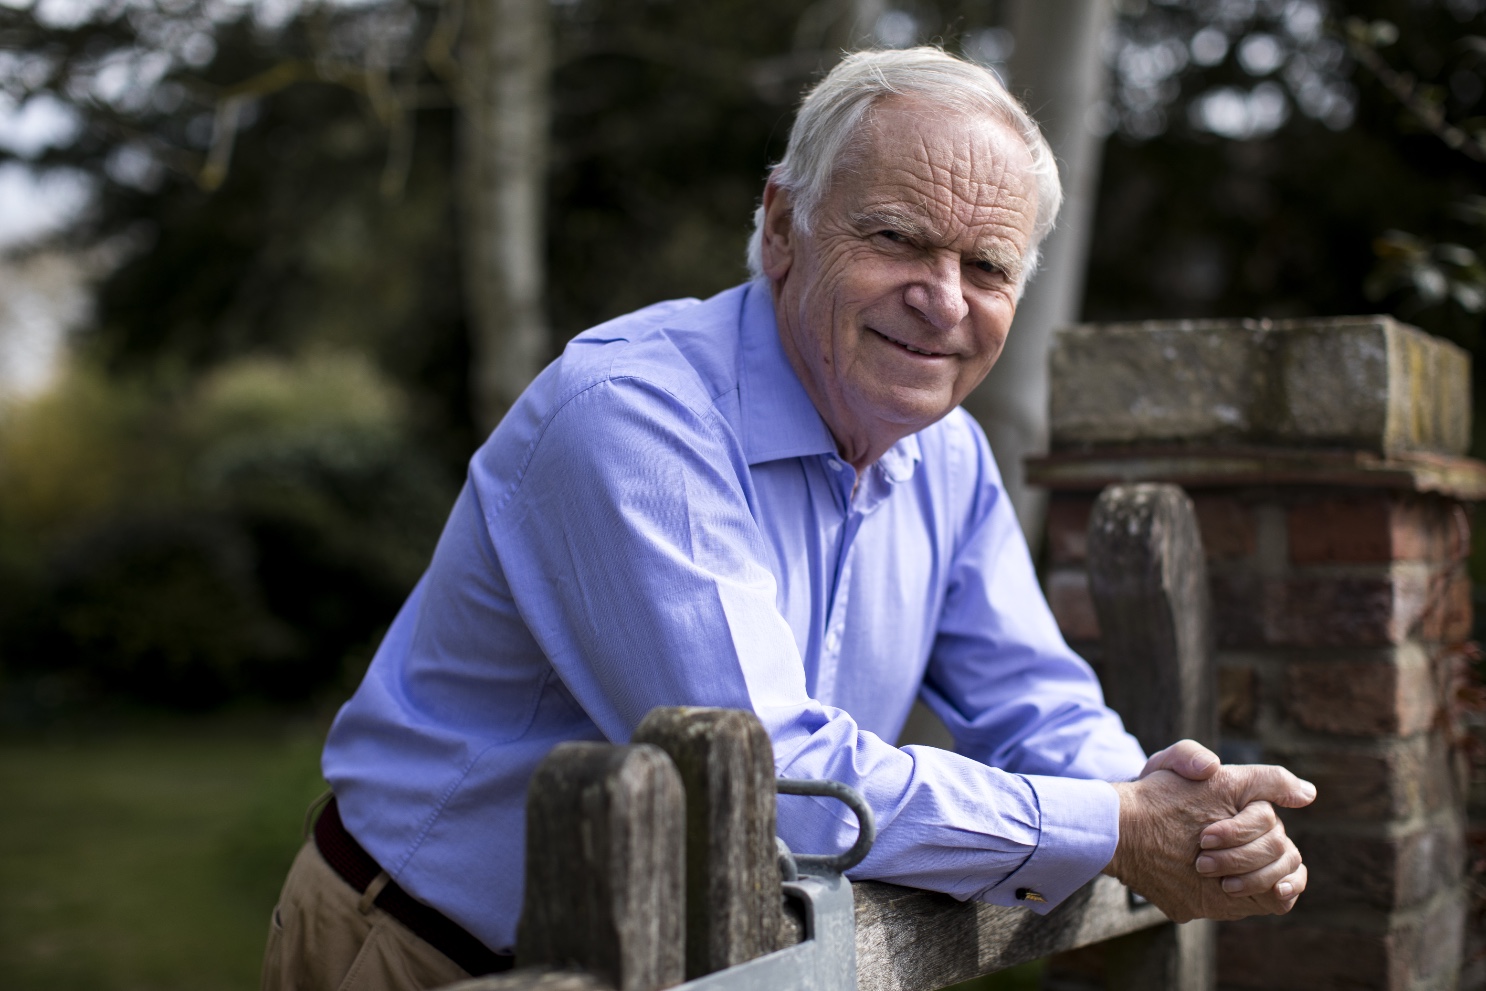 Jeffrey Archer wearing a light blue polo long sleeves while leaning on a wooden gate